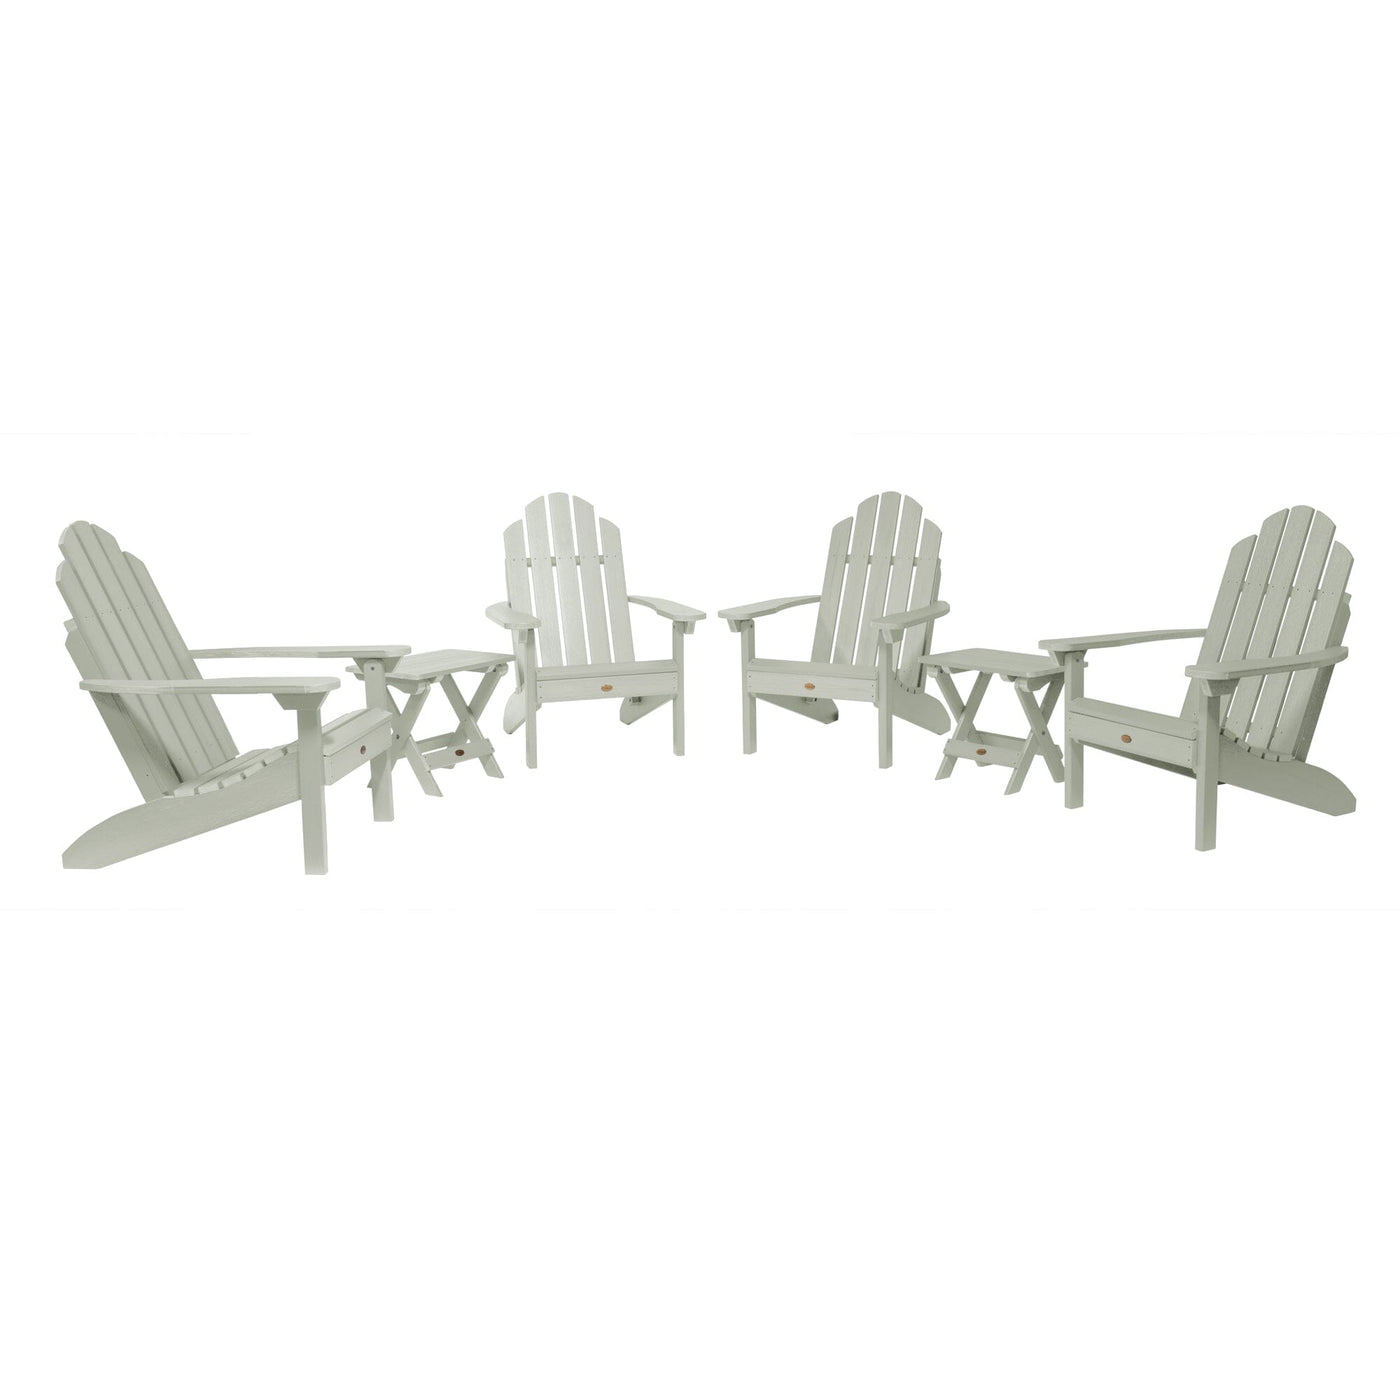 4 Classic Westport Adirondack Chairs with 2 Folding Side Tables Kitted Sets Highwood USA Eucalyptus 